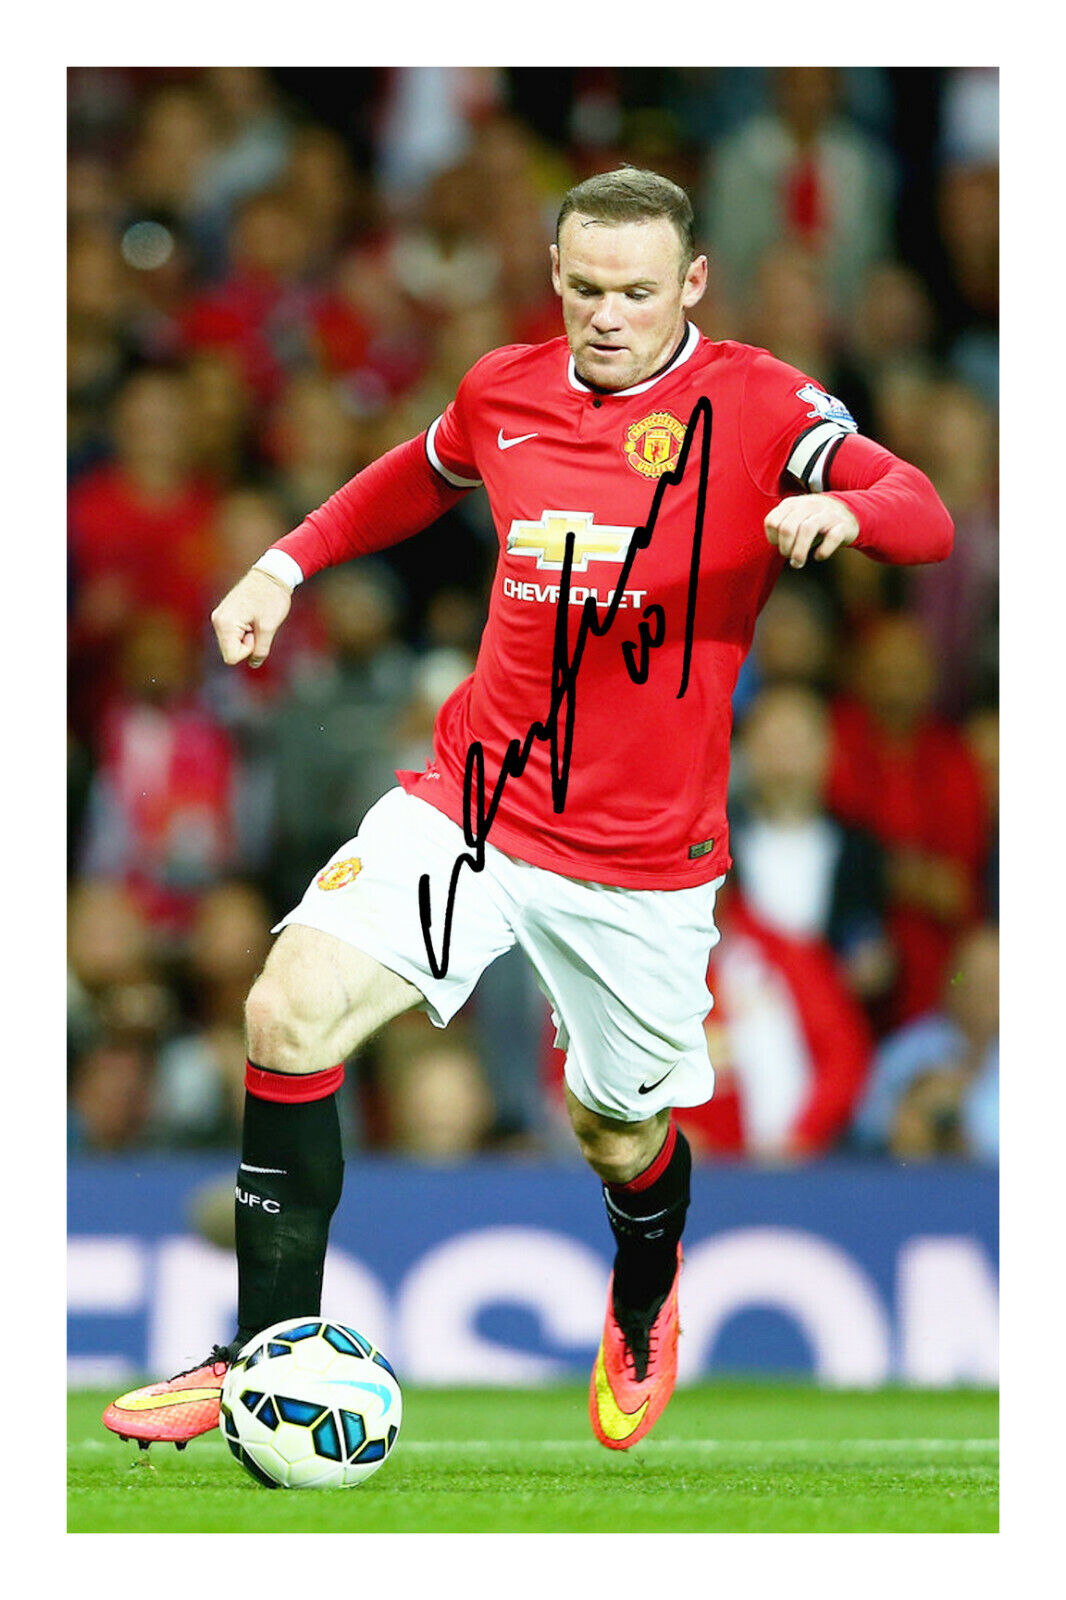 Wayne Rooney Signed A4 Autograph Photo Poster painting Print Manchester United FC